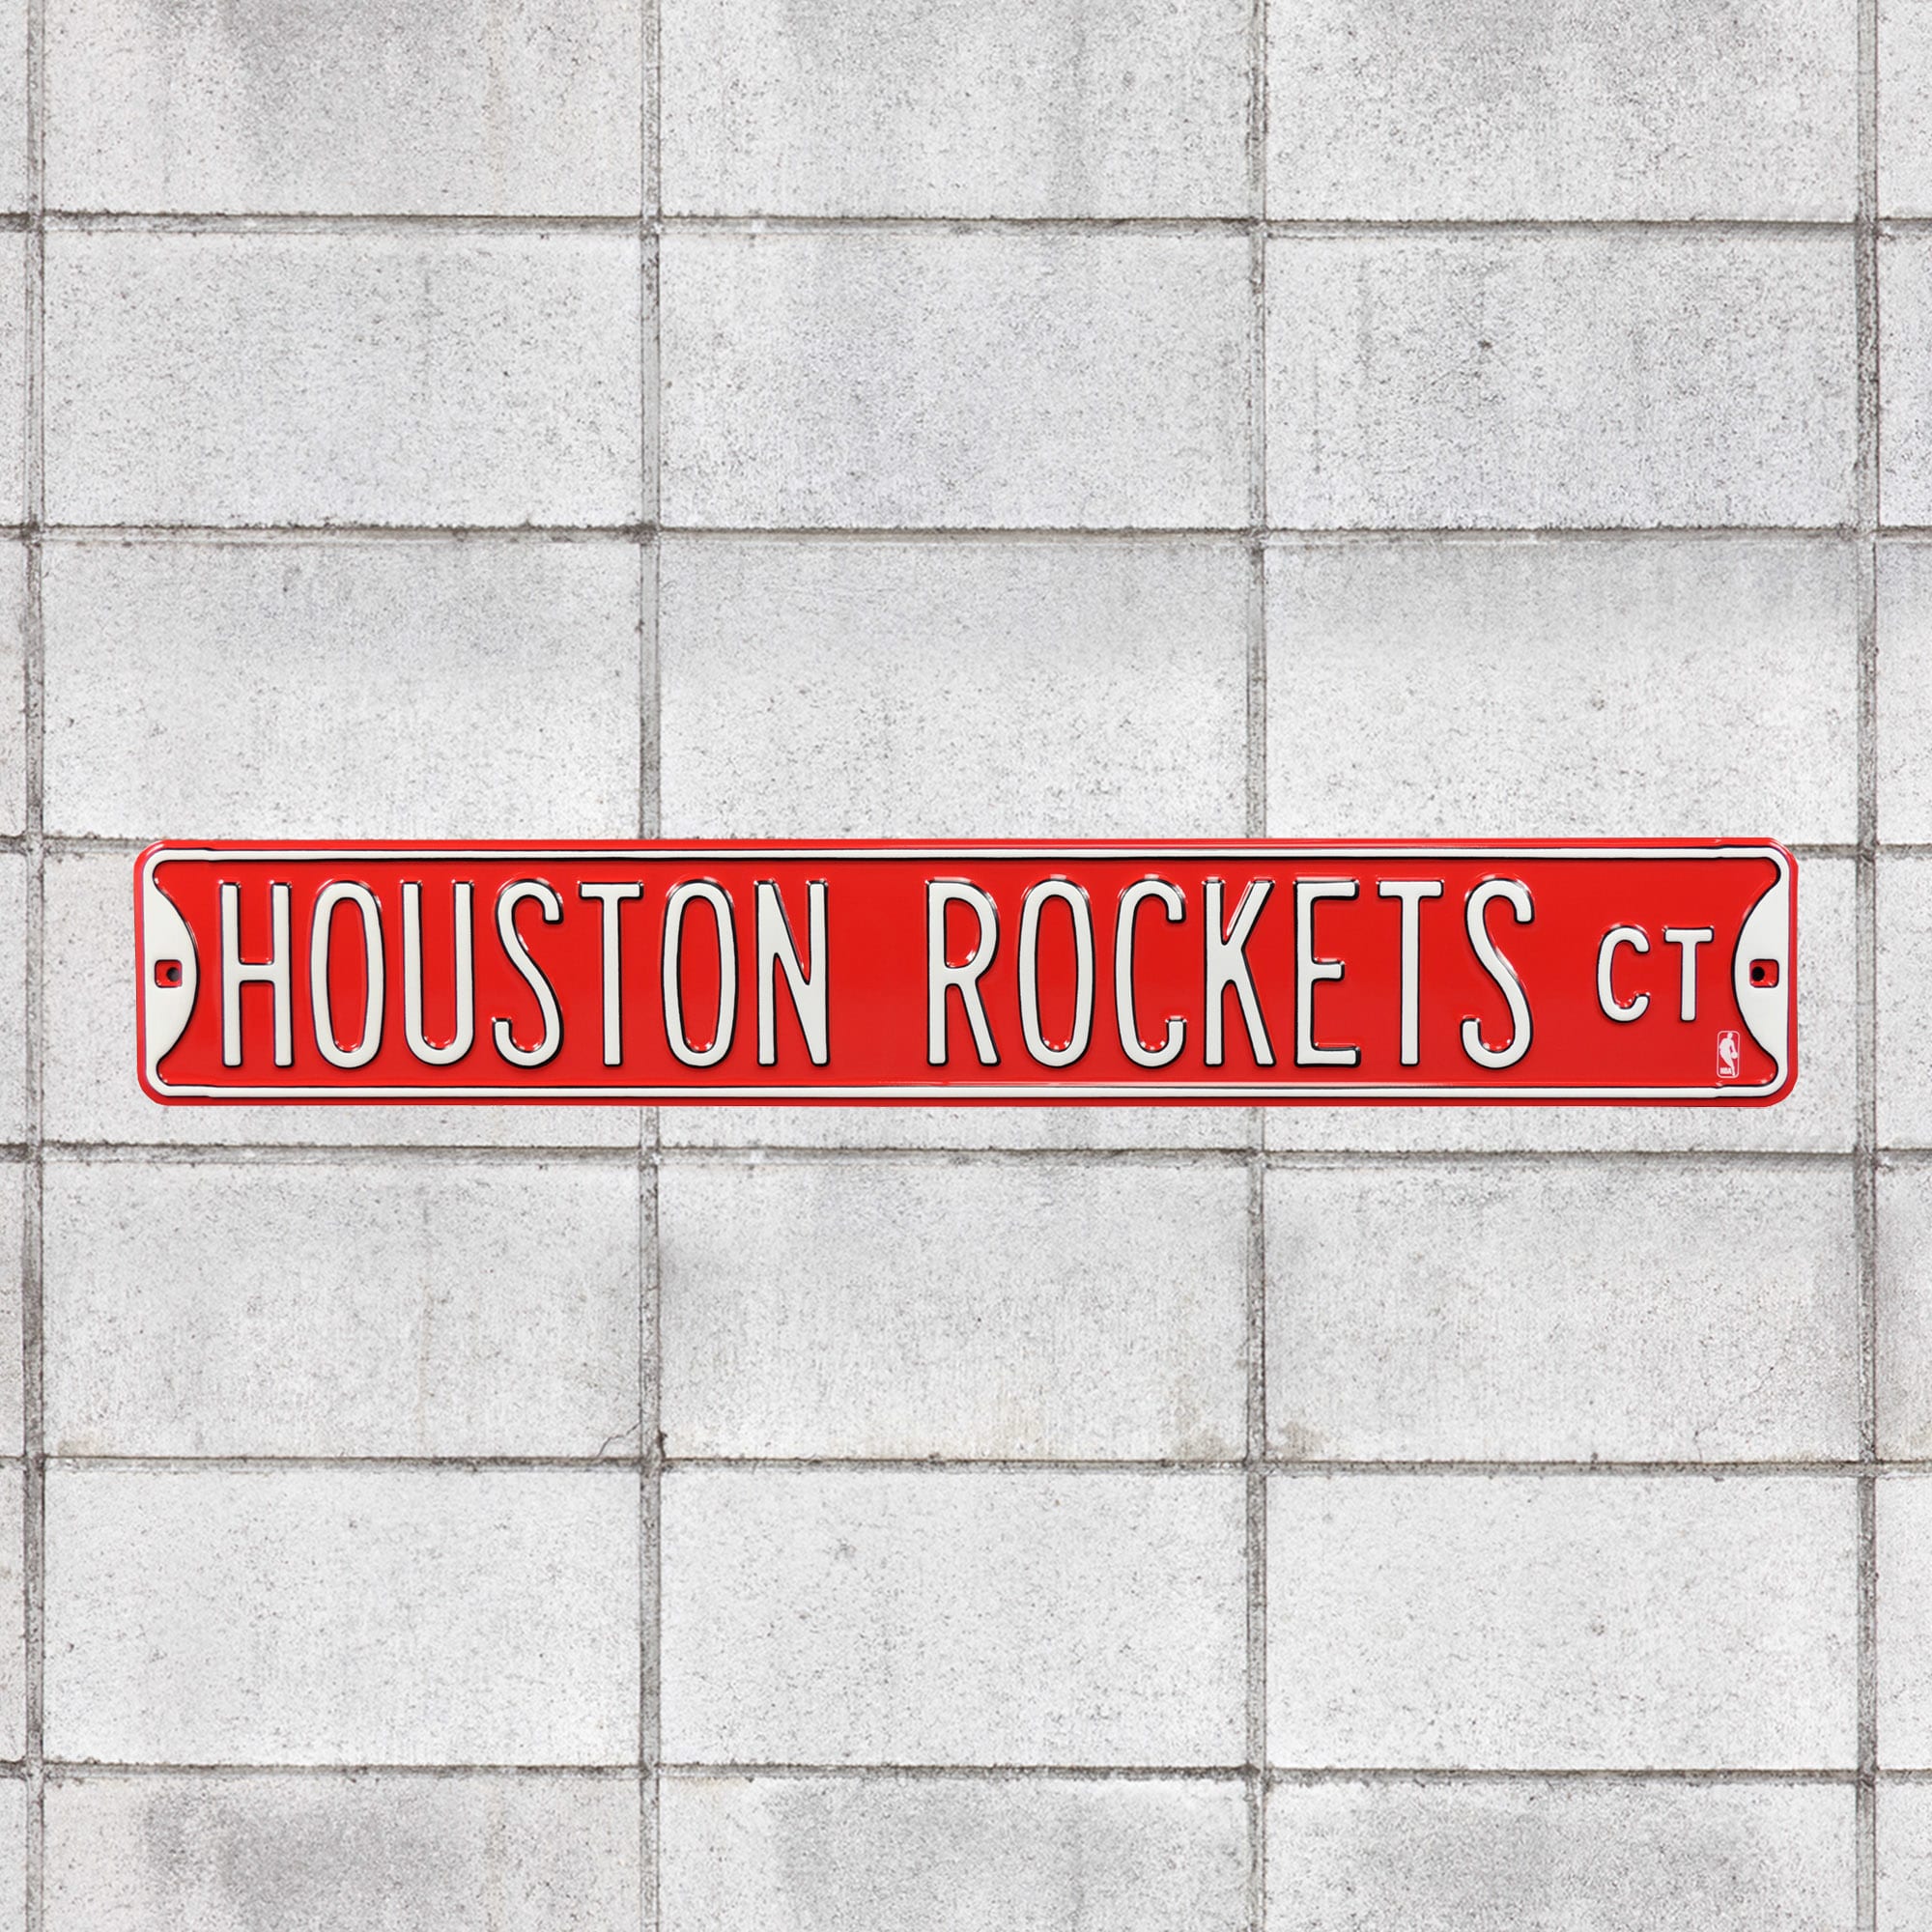 Houston Rockets: Court - Officially Licensed NBA Metal Street Sign 36.0"W x 6.0"H by Fathead | 100% Steel